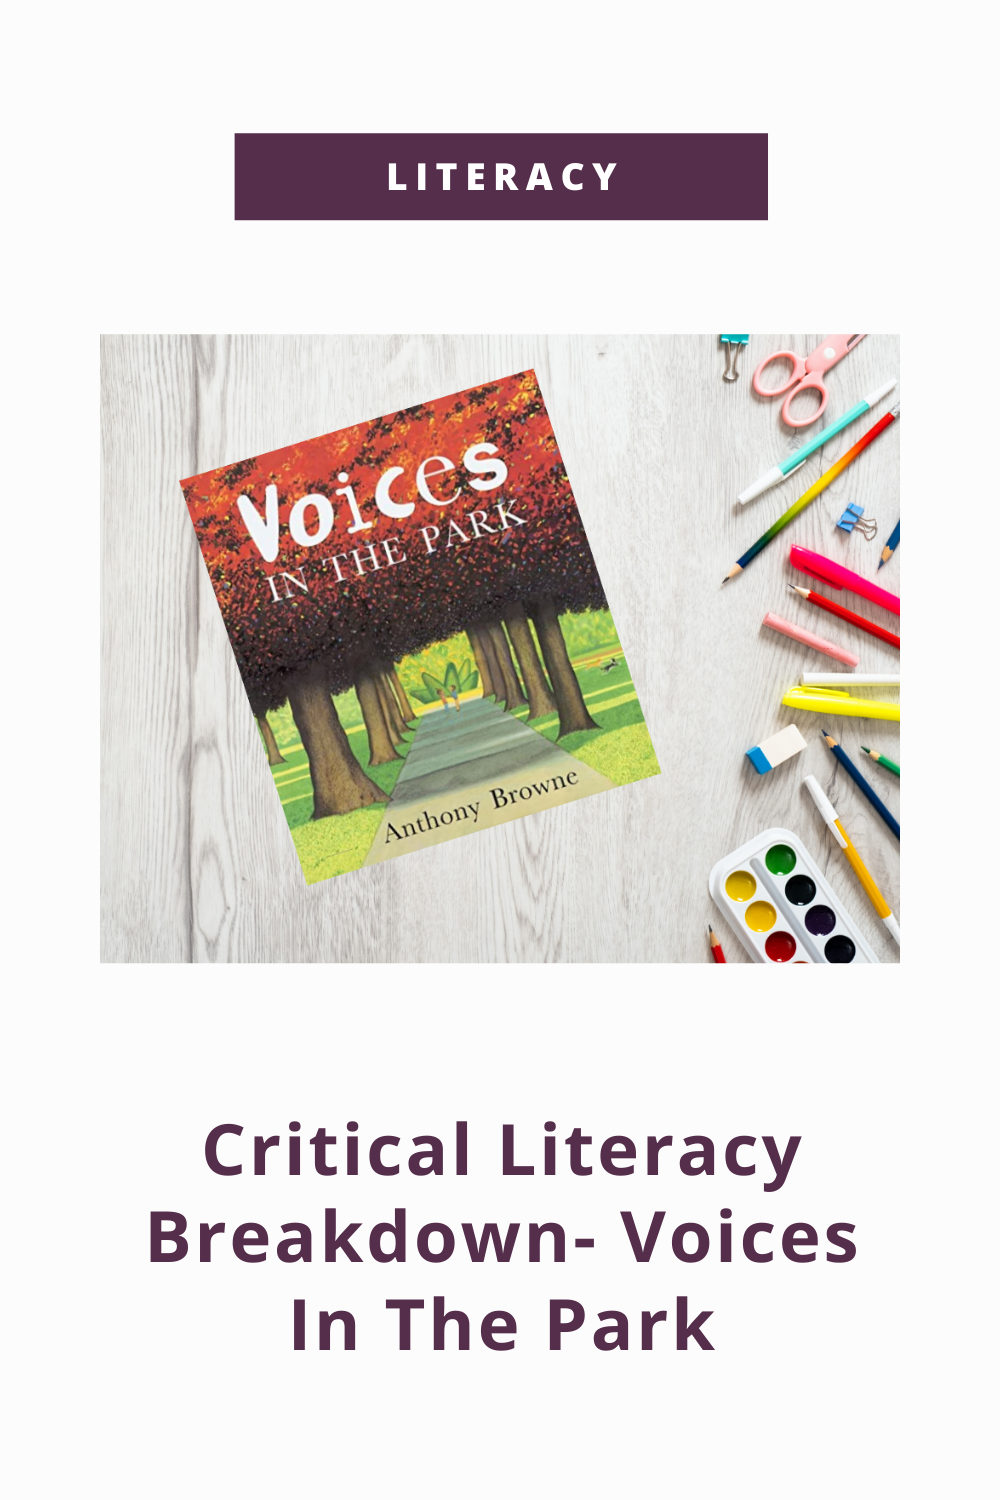 critical literacy breakdown with the book voices in the park overlay